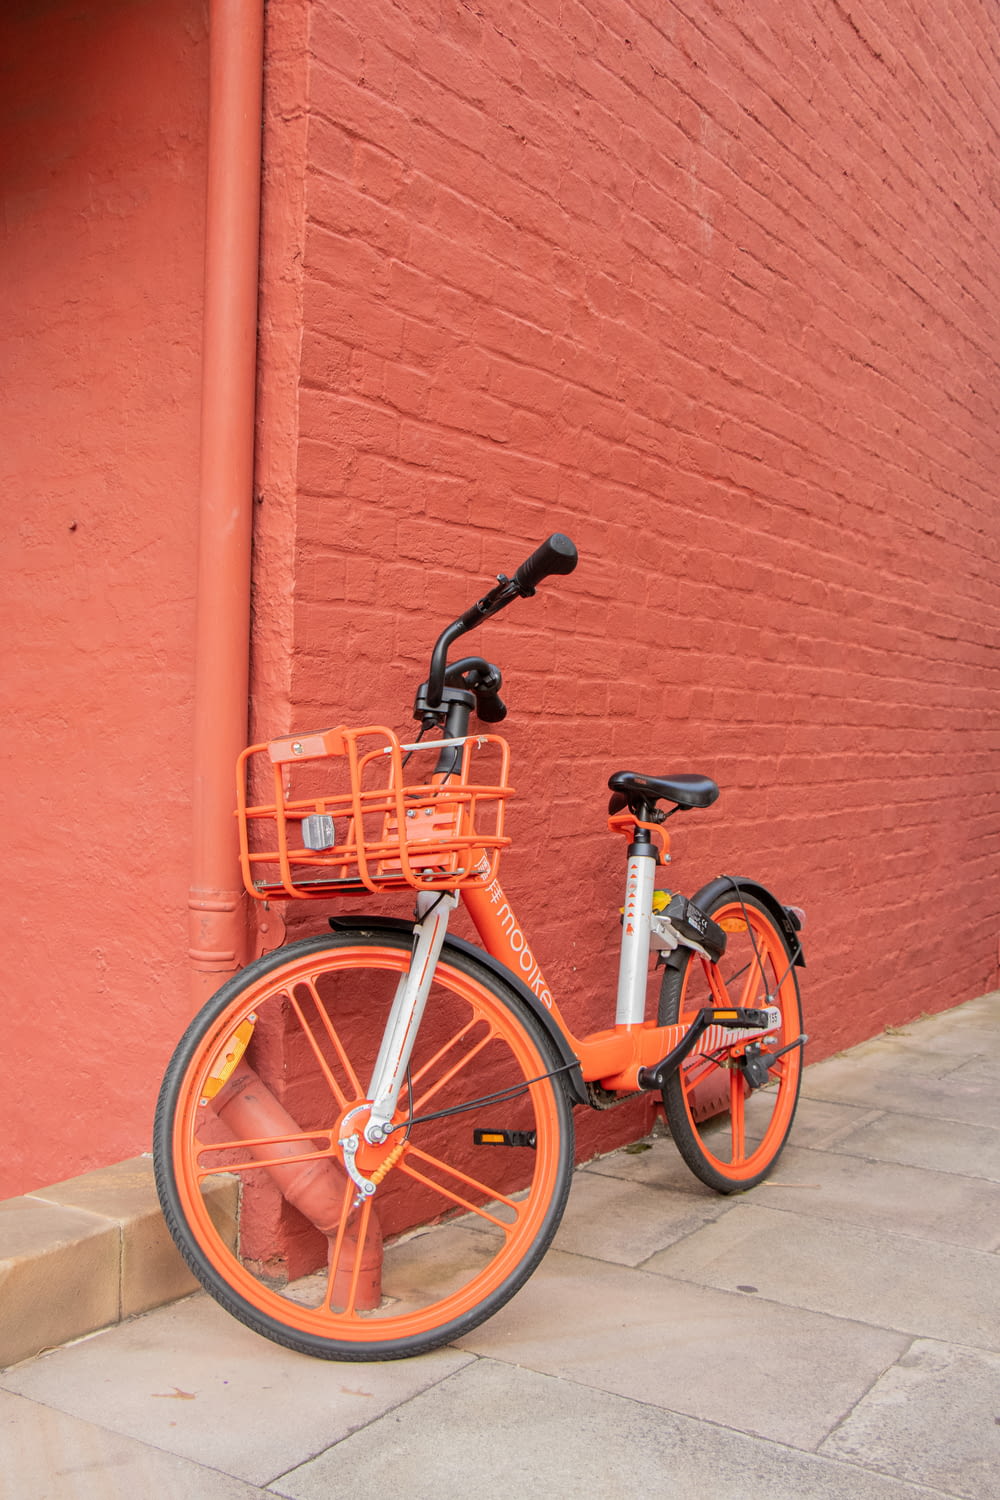 parked orange and white bicycle